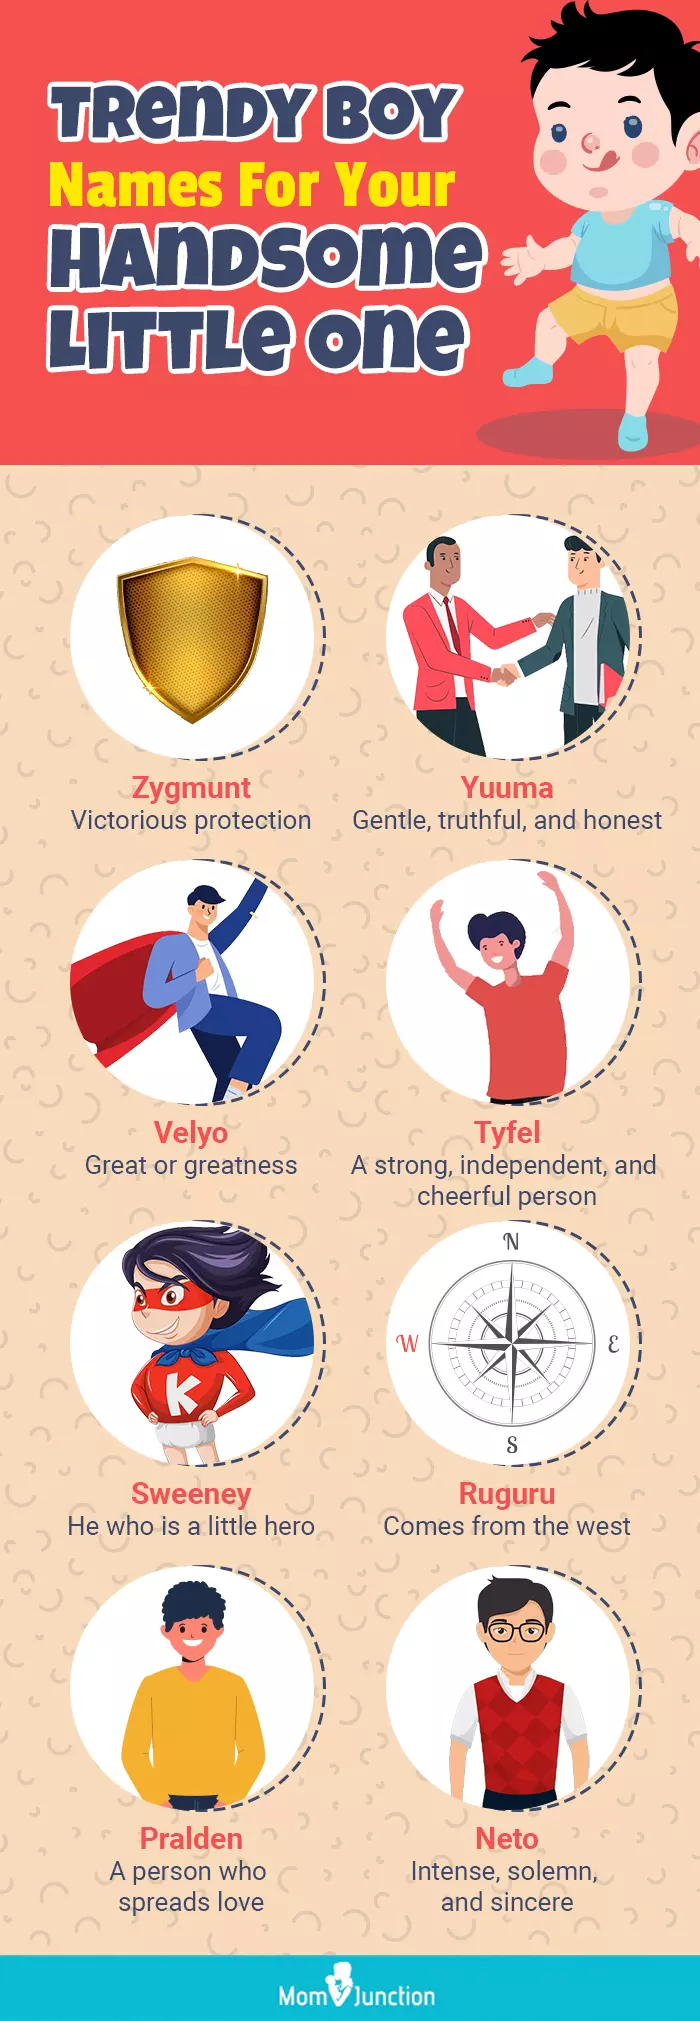 trendy boy names for your handsome little one (infographic)